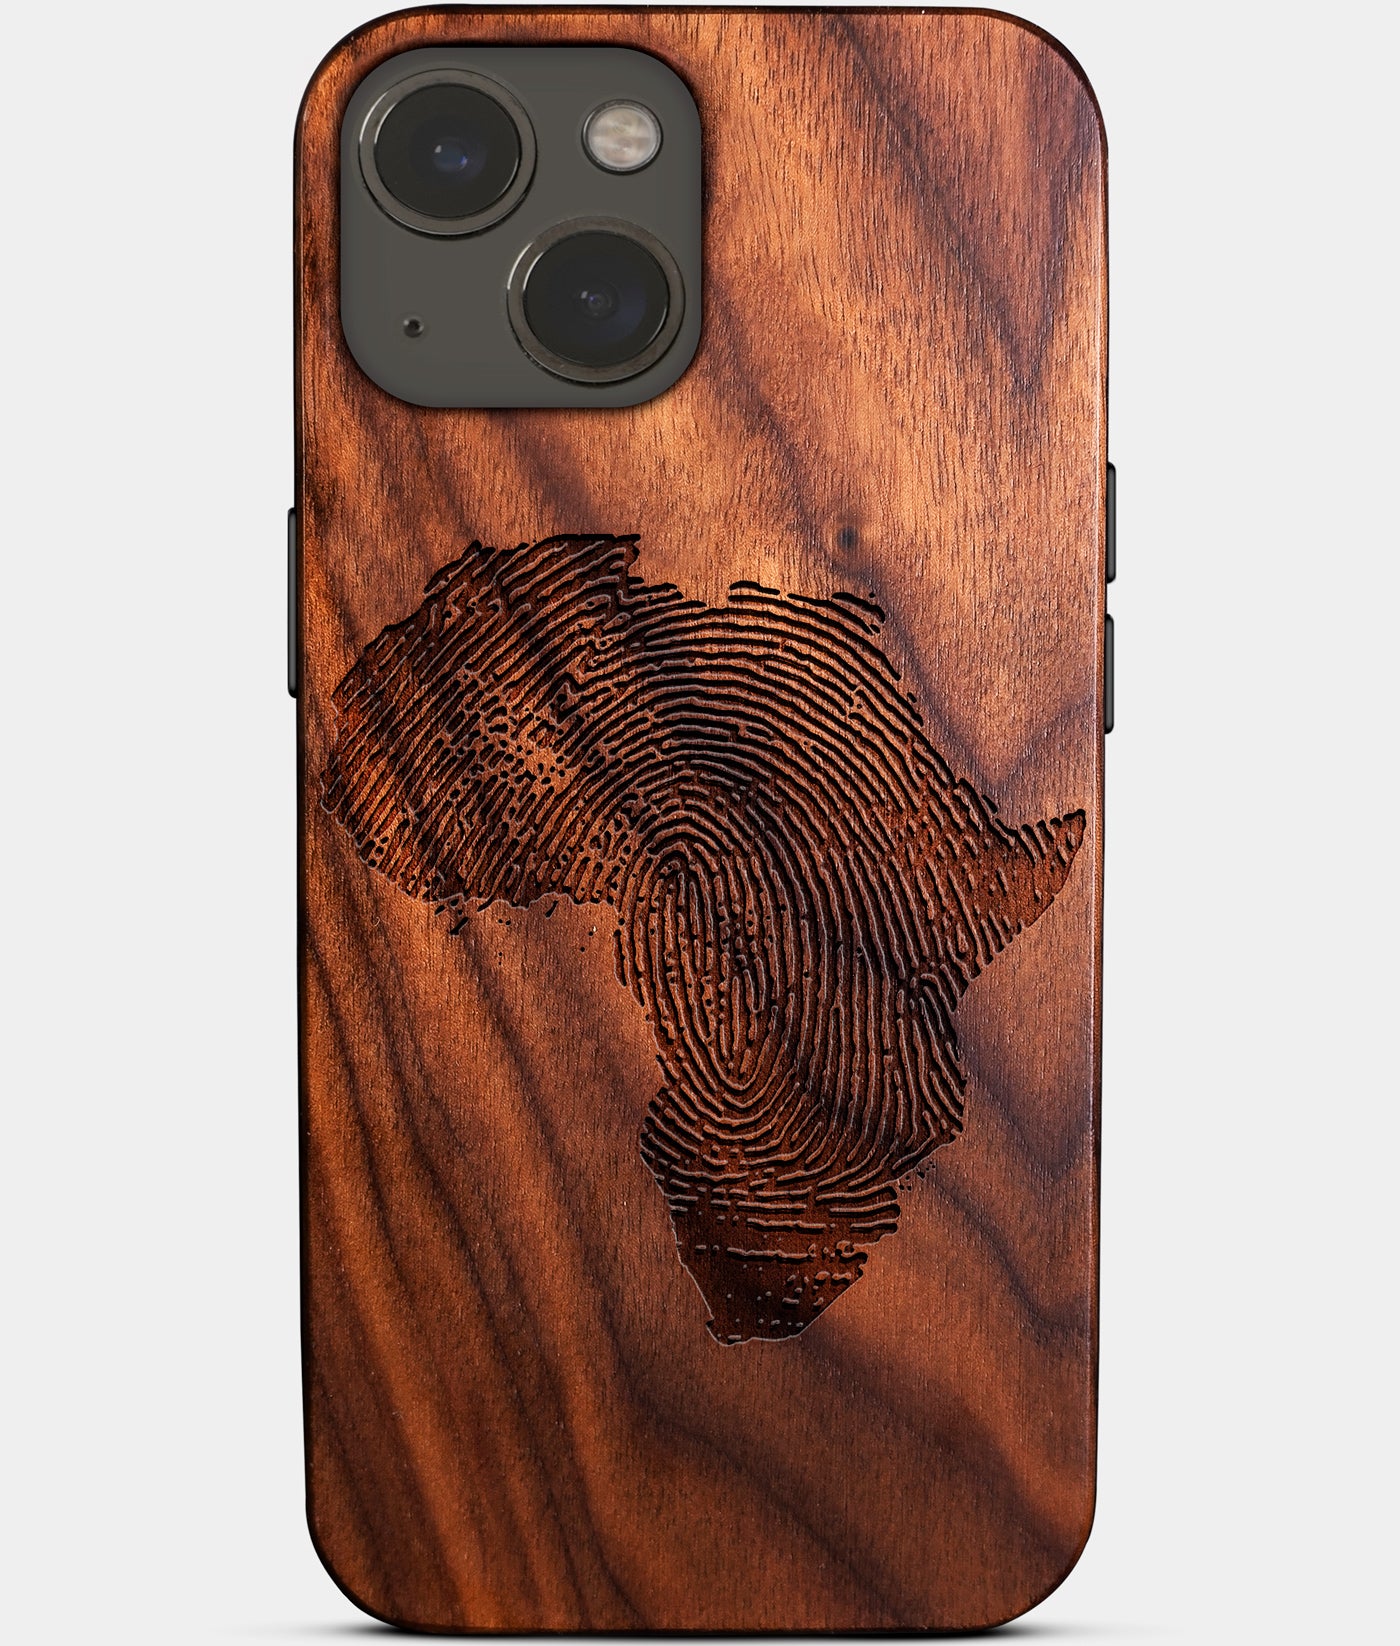 Africa Fingerprint Shape Wood iPhone 14 Plus Case - HBCU Gear College Graduation Gifts For Black Men And Women Black Owned Gifts 2022 Christmas Gifts - African American Black Owned Businesses iPhone 14 Plus Cover In Los Angeles 2022 Custom Gifts For Personalized Black Men